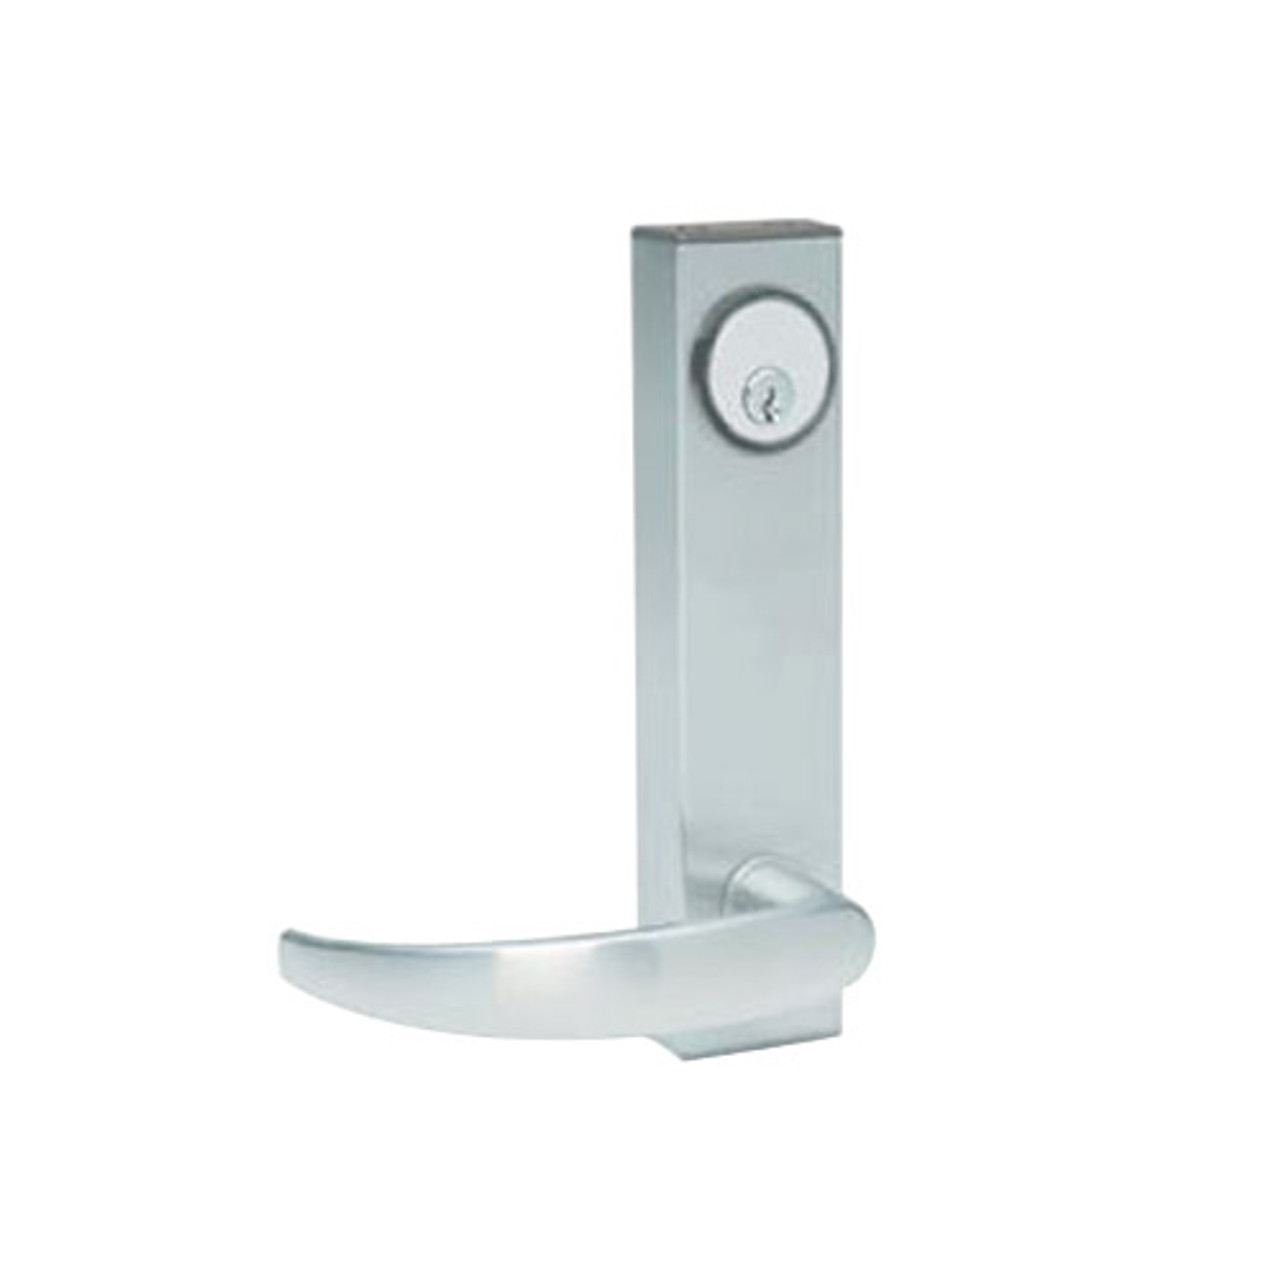 3080E-01-0-33-50 US32 Adams Rite Electrified Entry Trim with Curve Lever in Bright Stainless Finish